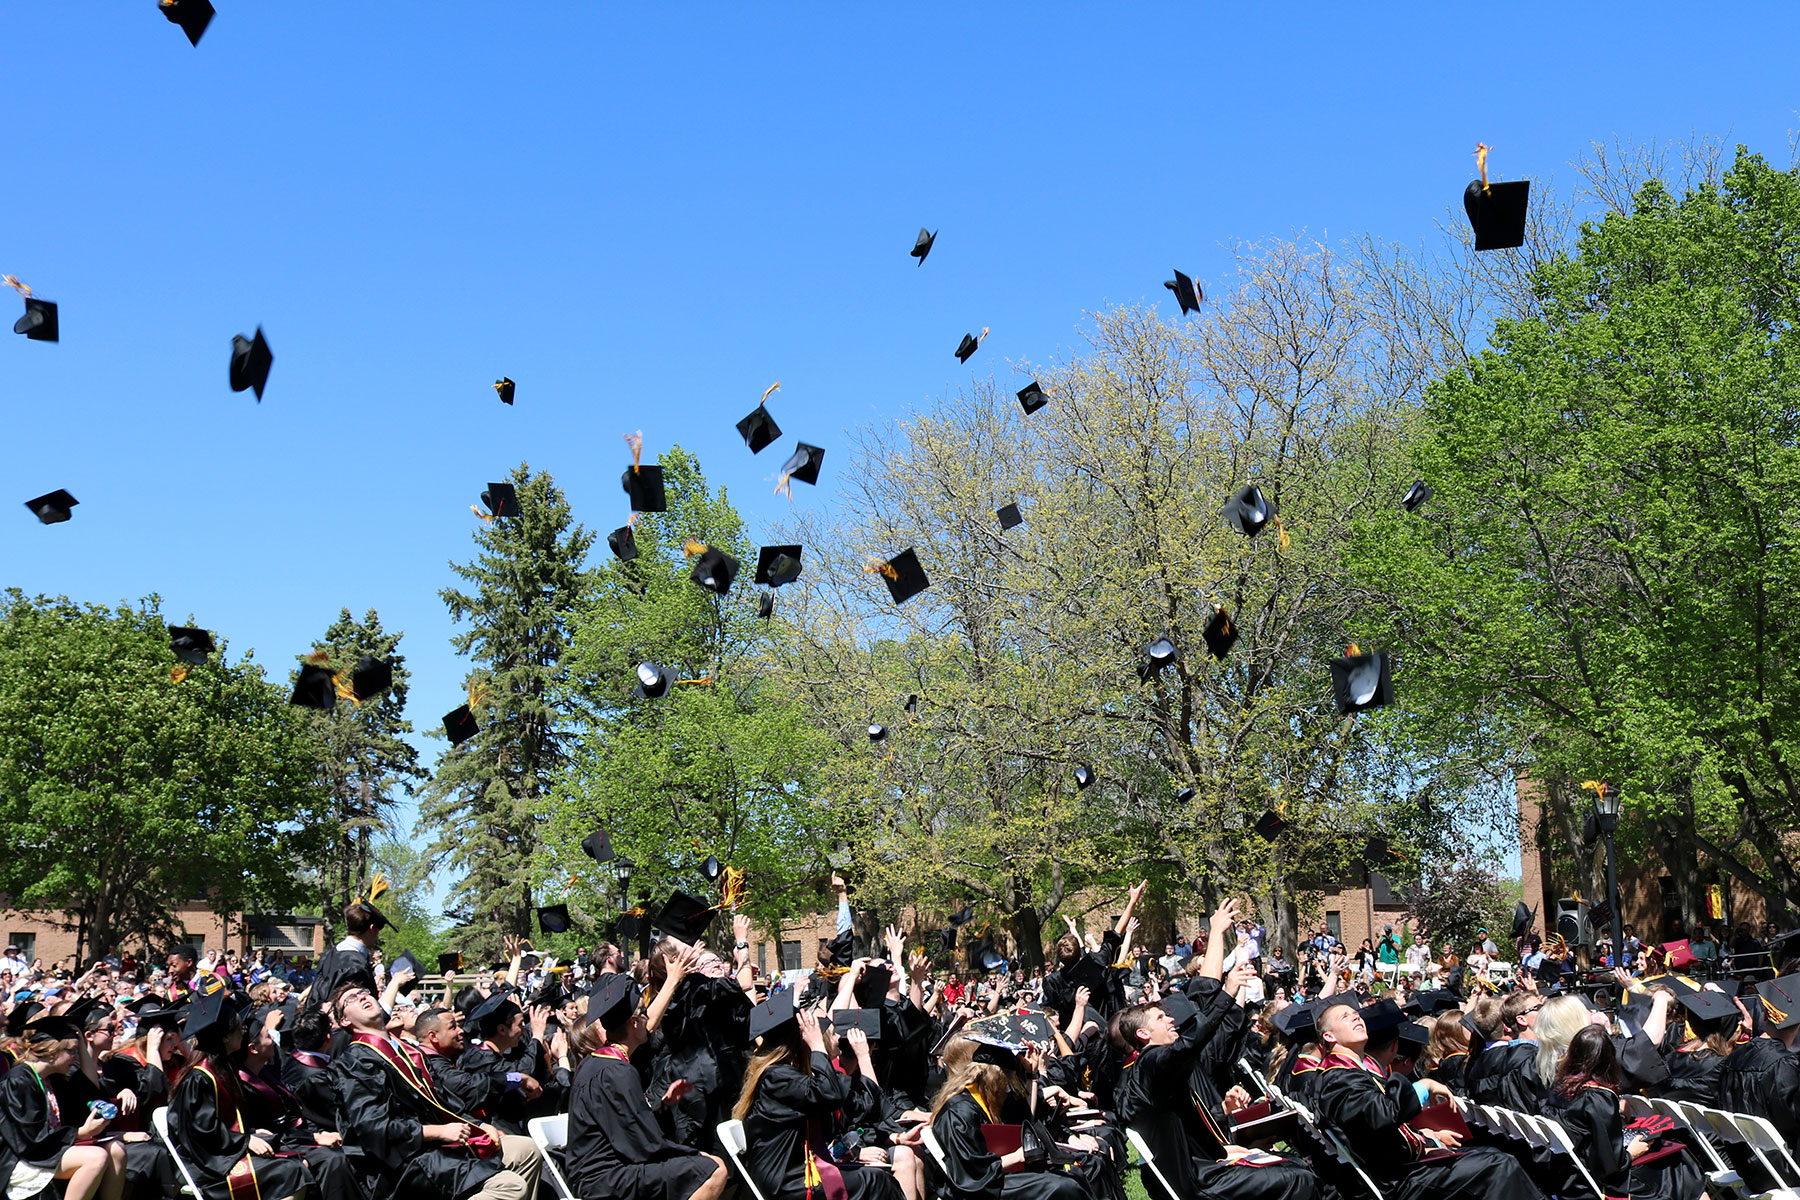 Graduates celebrate by tossing caps into the air